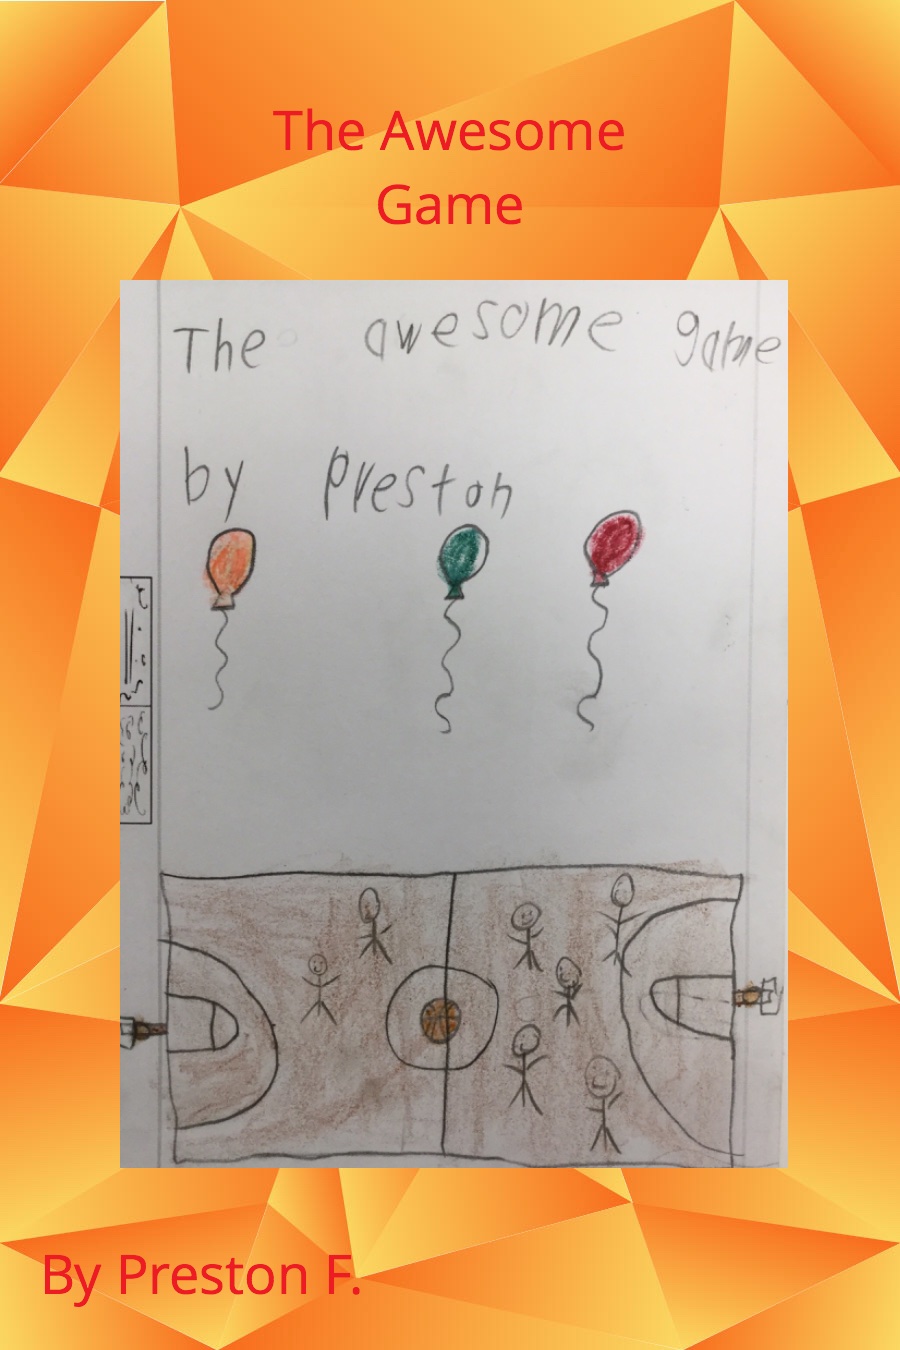 The Awesome Game by Preston F